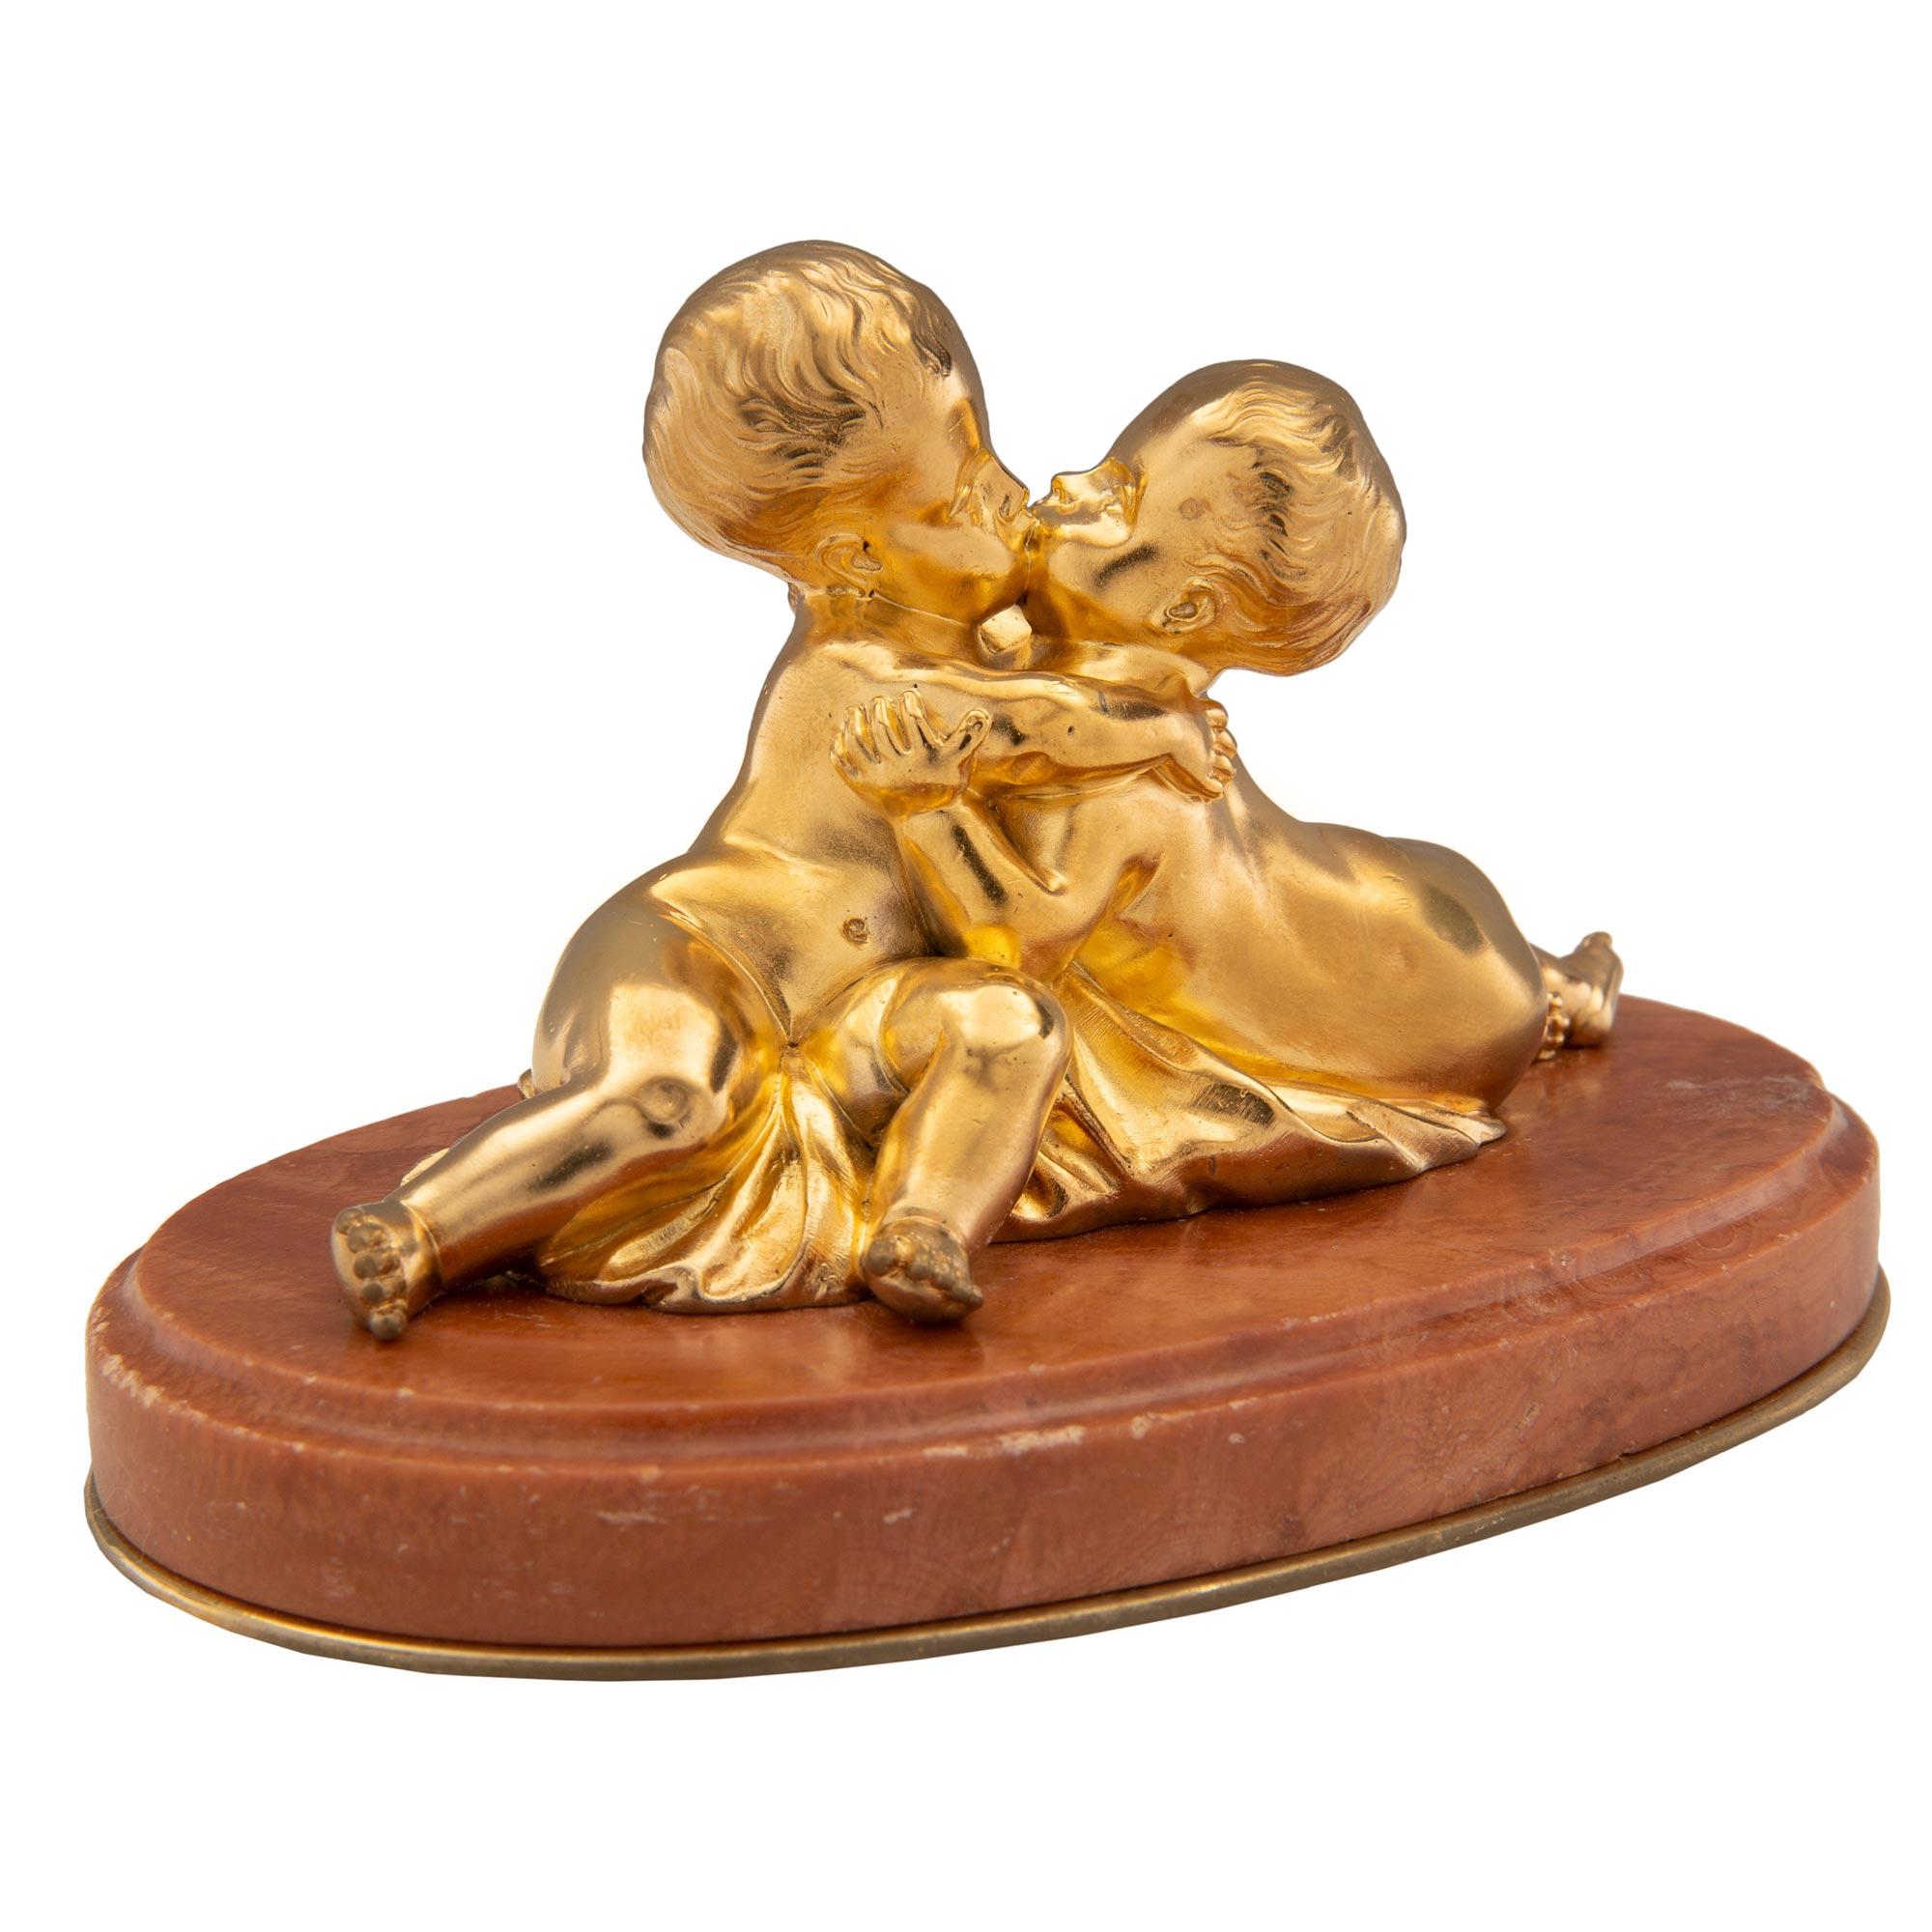 A most charming French 19th century Louis XVI st. ormolu and Rouge Royale marble small scale statue/paperweight, signed F. Costa. The statue is raised by an oval Rouge Royale base with a mottled border and a fine bottom ormolu fillet. Above are two